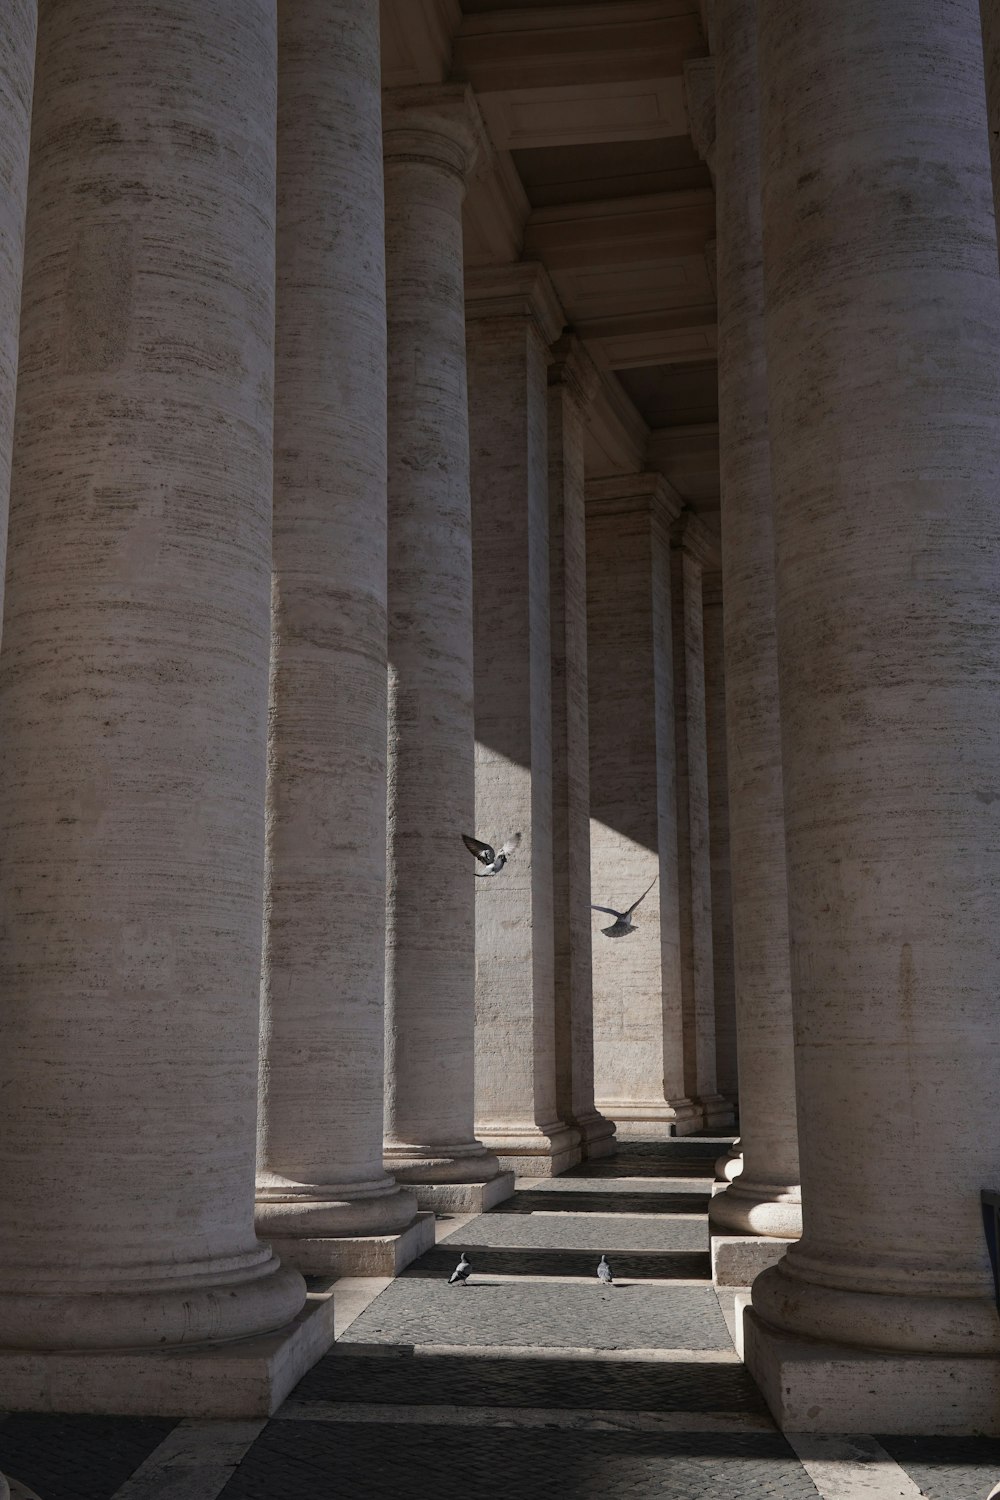 a row of white pillars with a bird flying between them